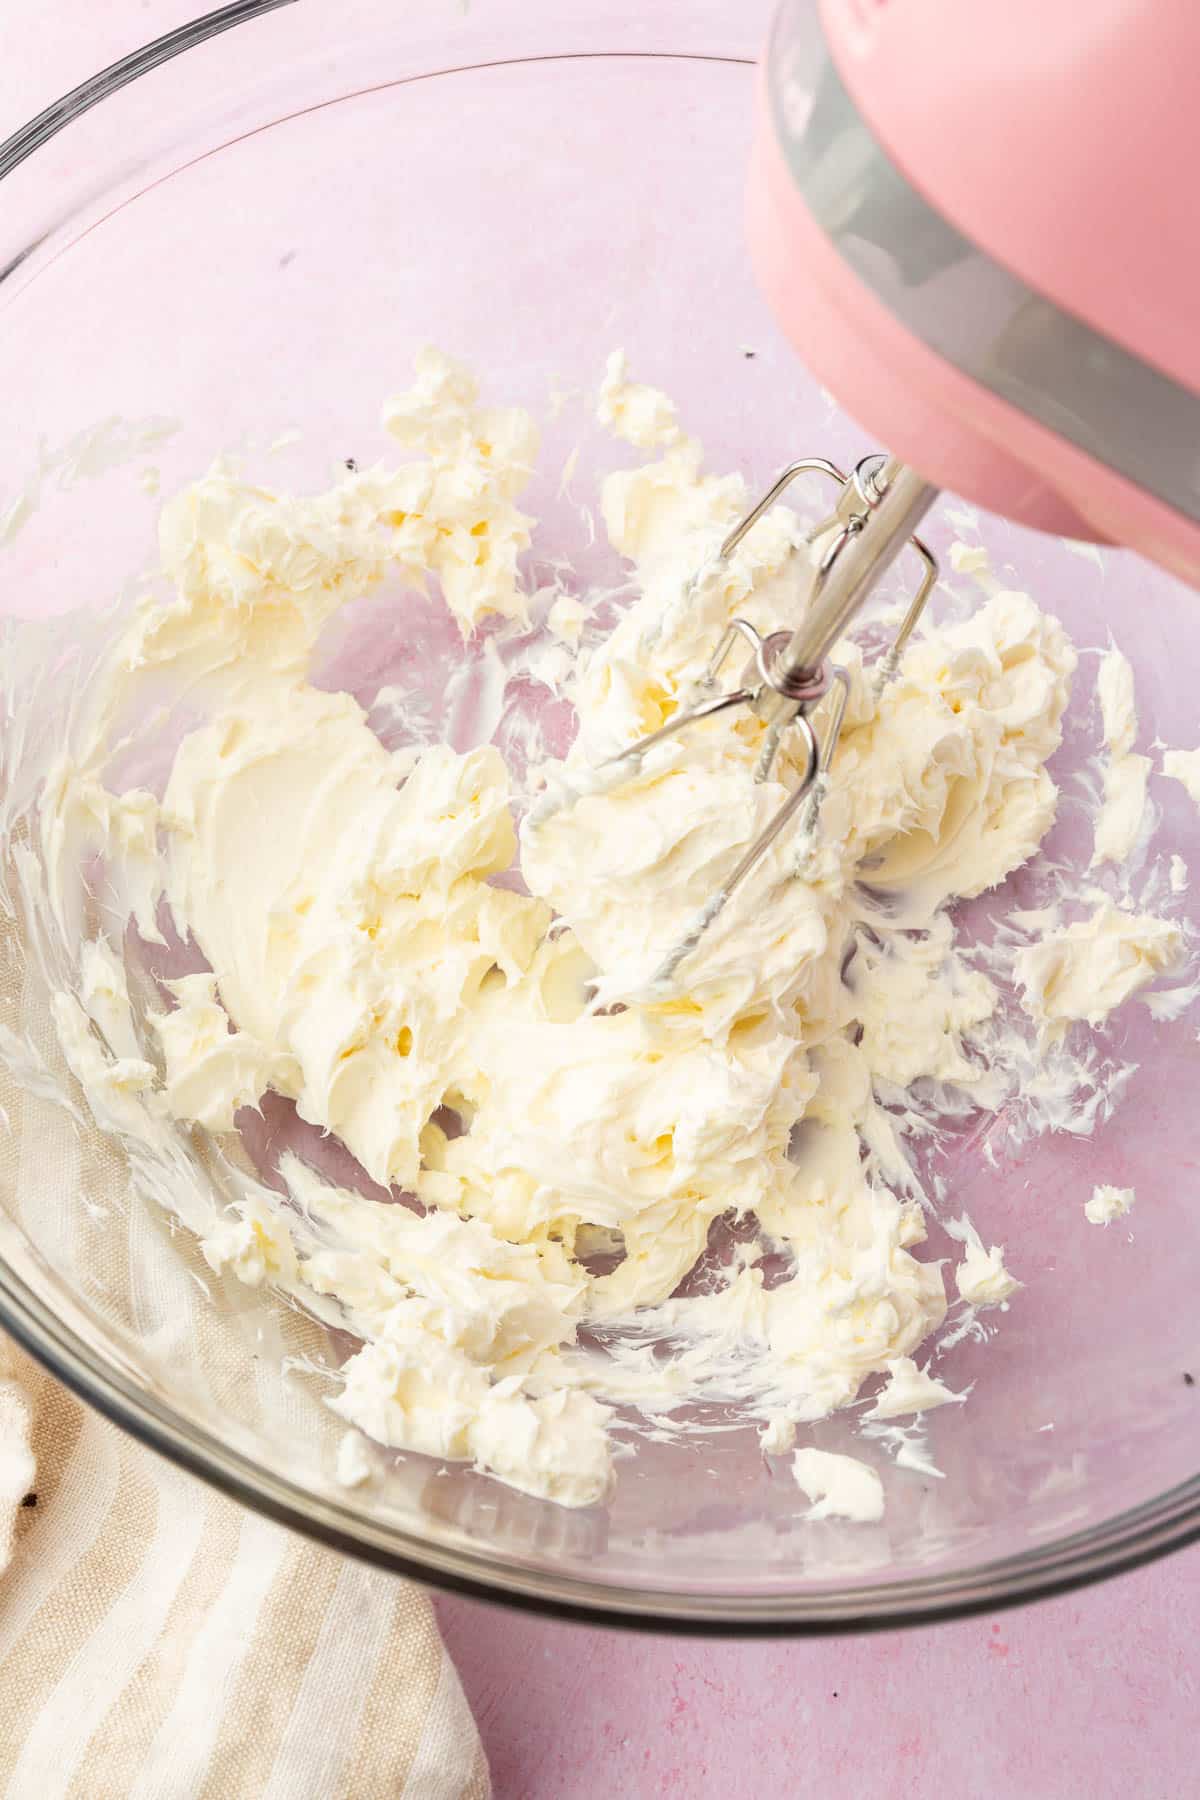 An electric hand mixer blending cream cheese in a glass mixing bowl.